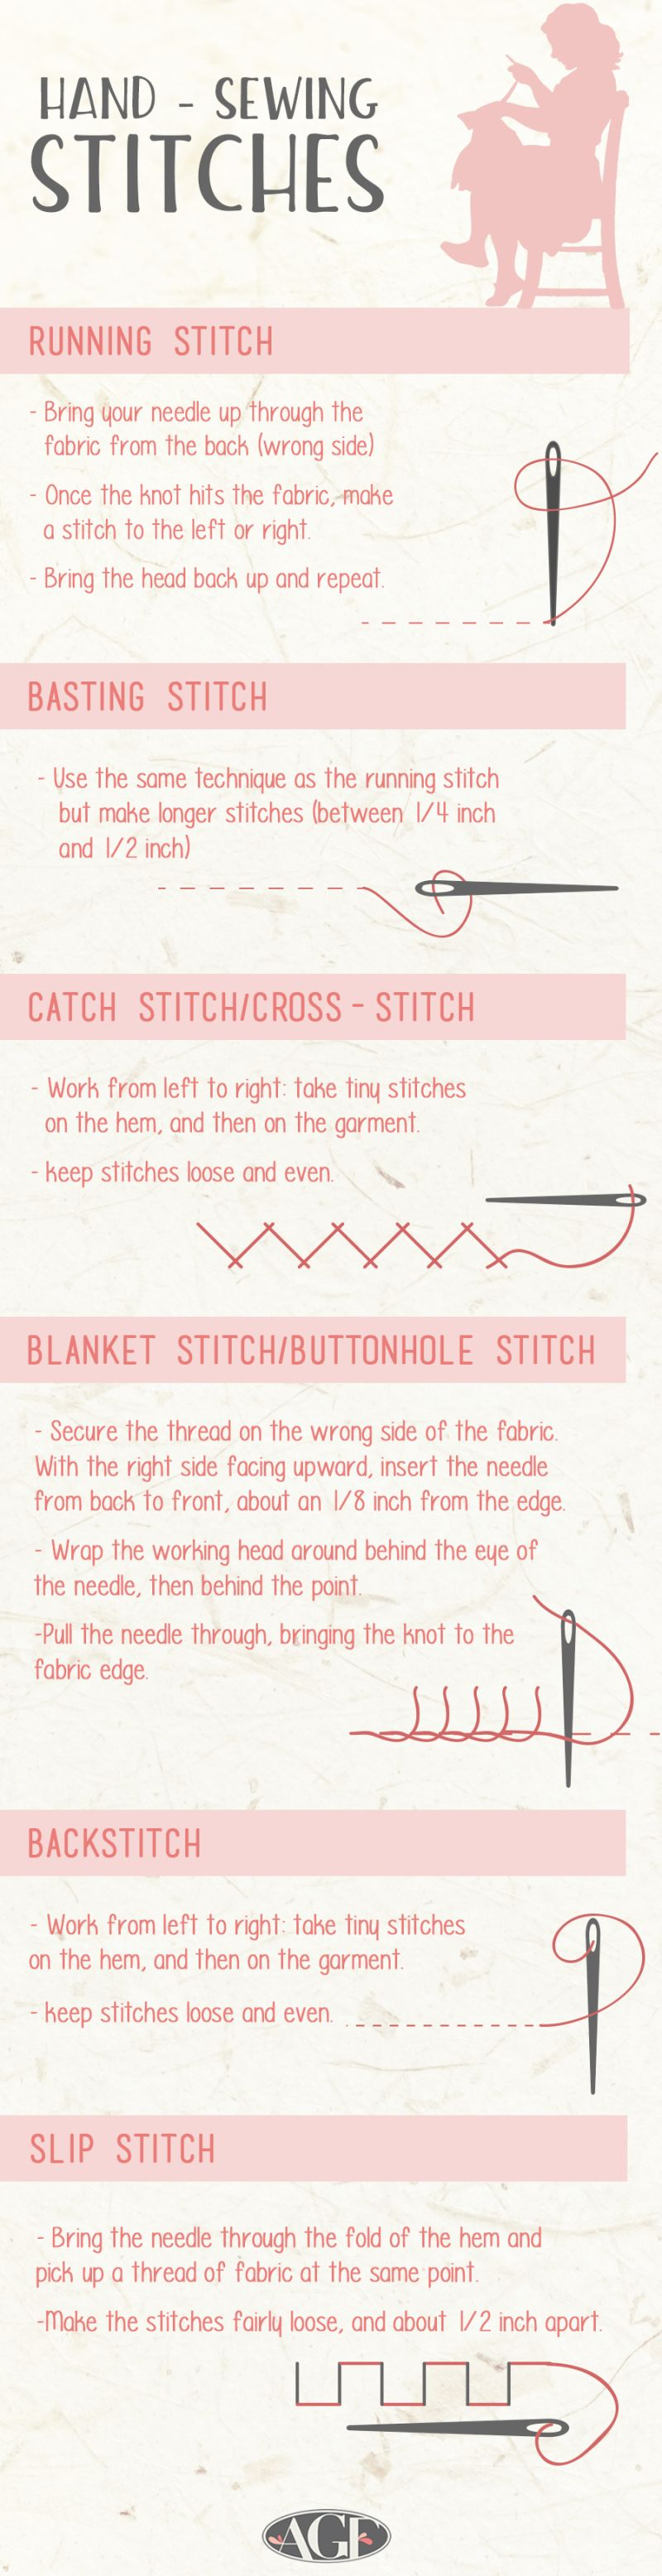 Sewing Stitches Guide Hand Sewing Stitches Guide Art Gallery Fabrics The Creative Blog